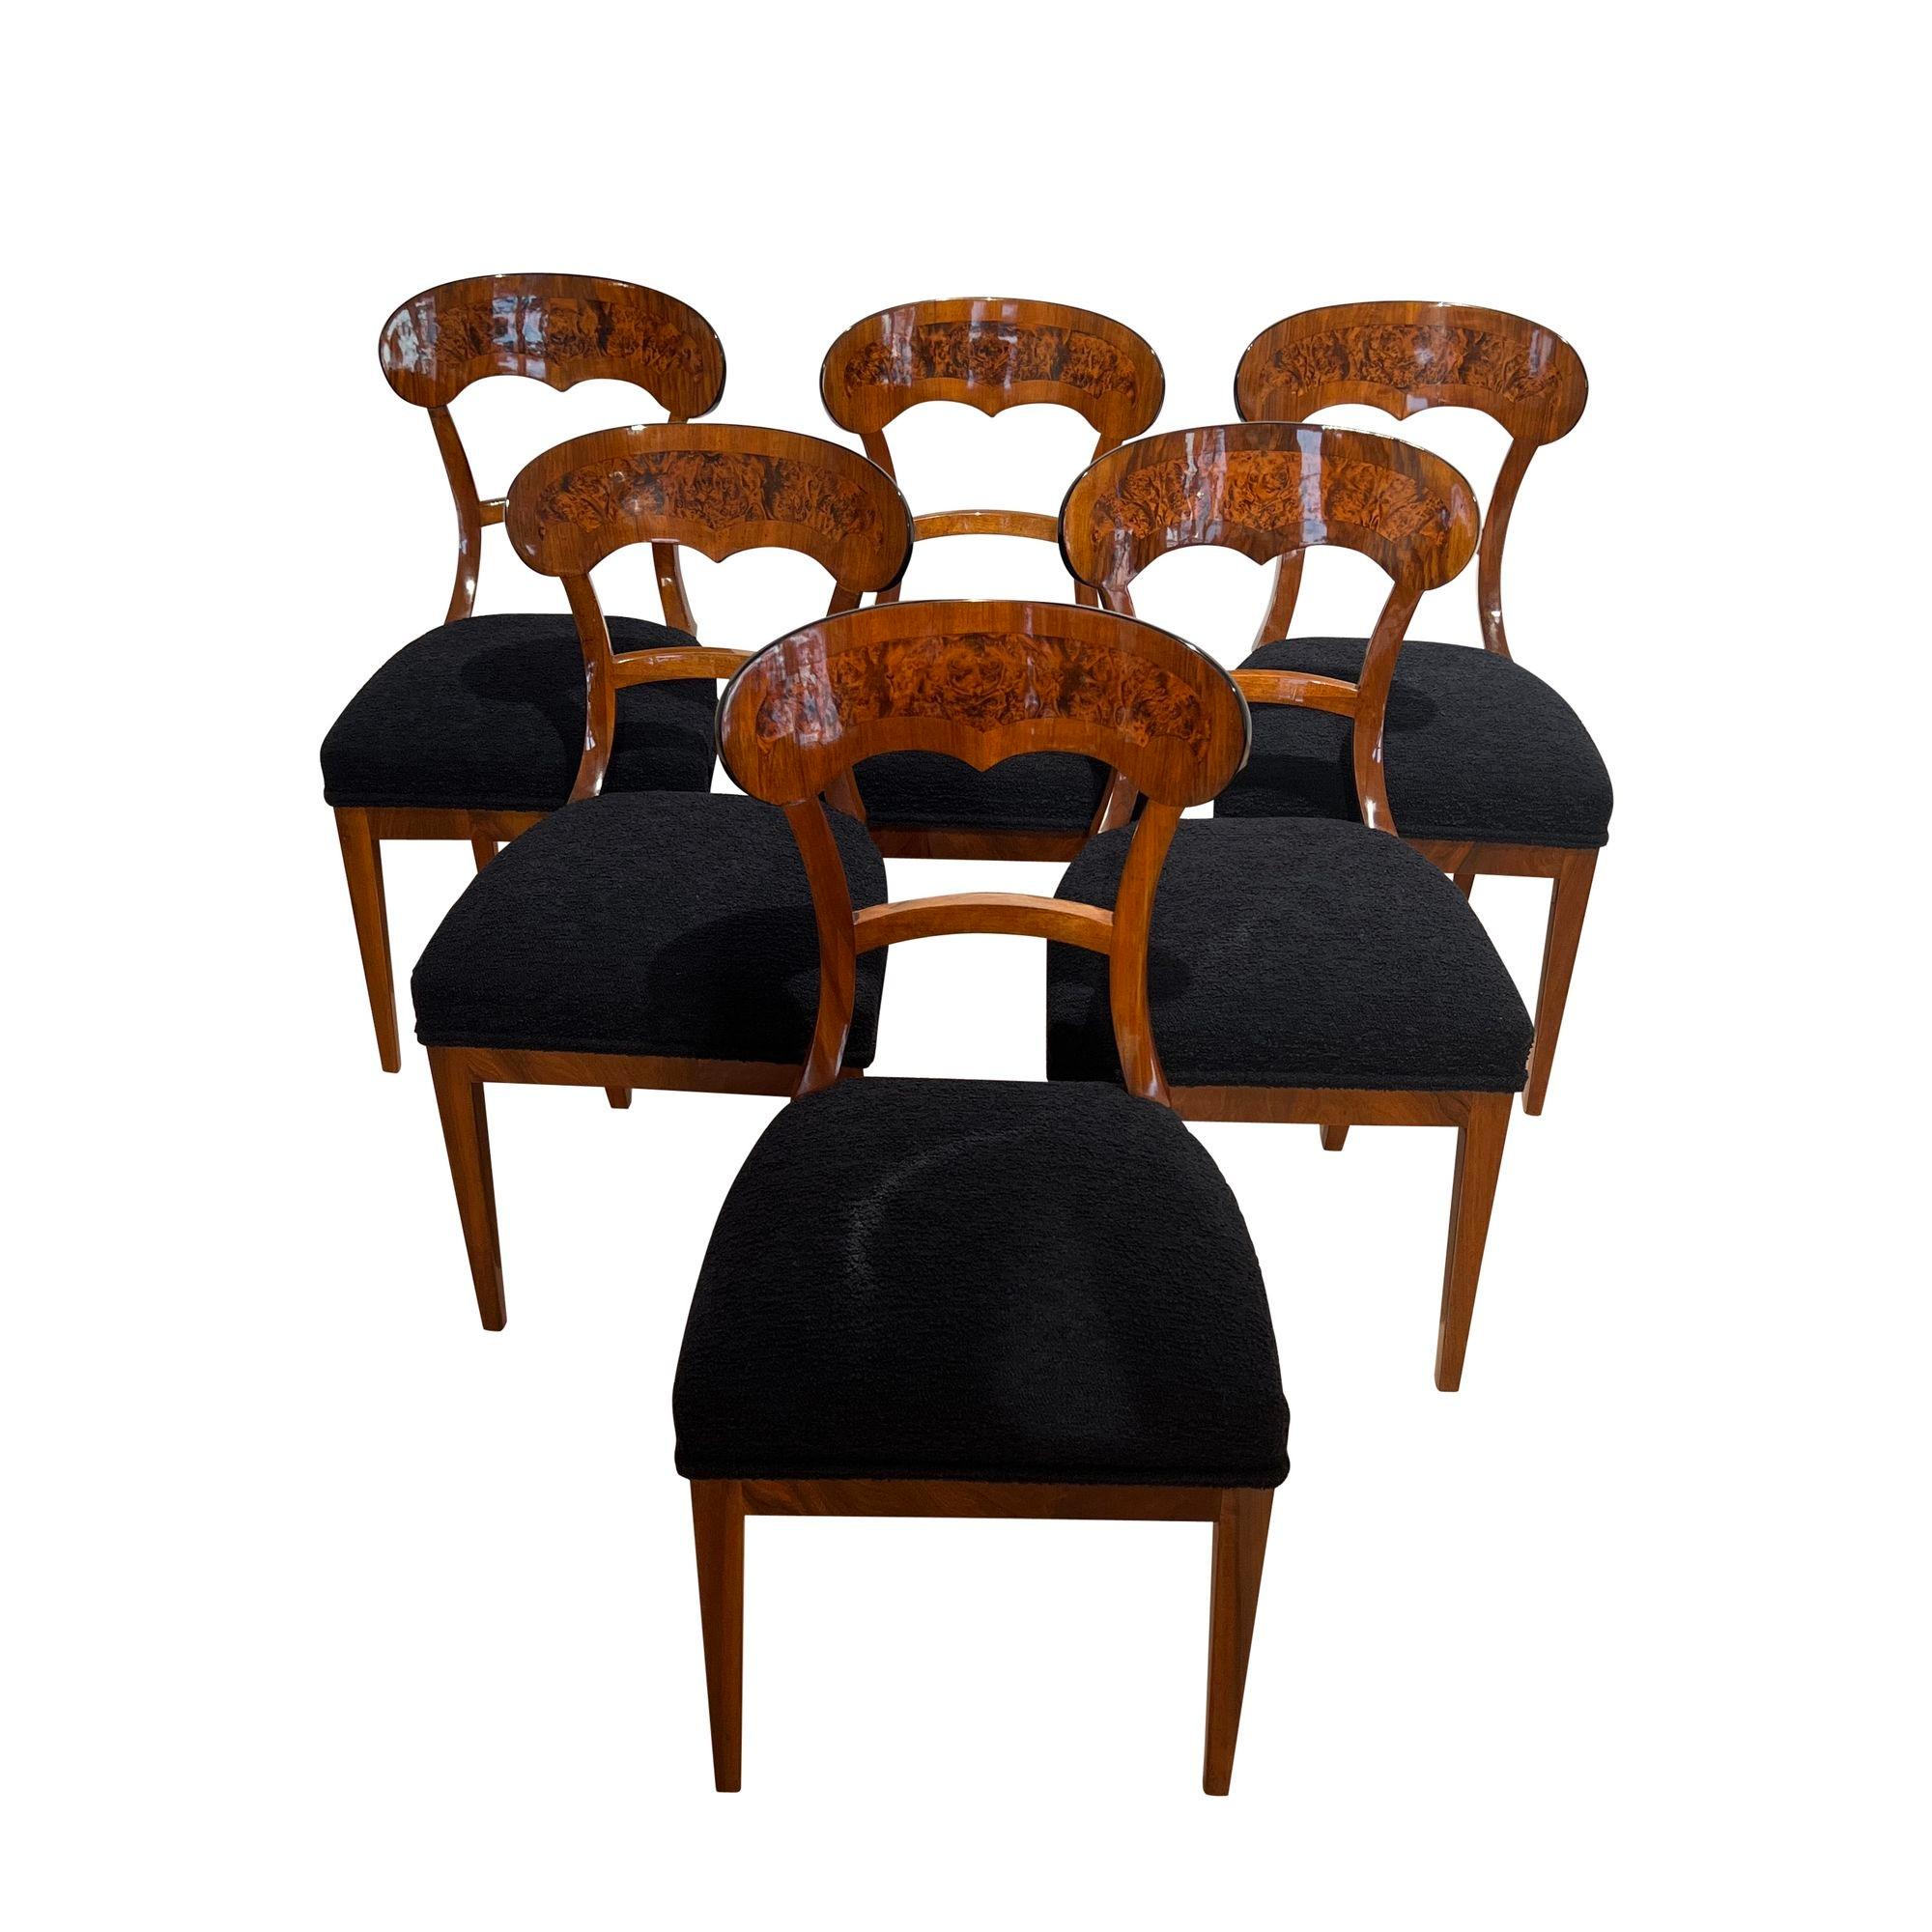 Beautiful set of six neoclassical Biedermeier shovel chairs (backrest in form of a shovel) from South Germany around 1840/50.
Solid Walnut and walnut veneer with walnut roots inlays on the front of the shovel. Ebonized upper edge of the